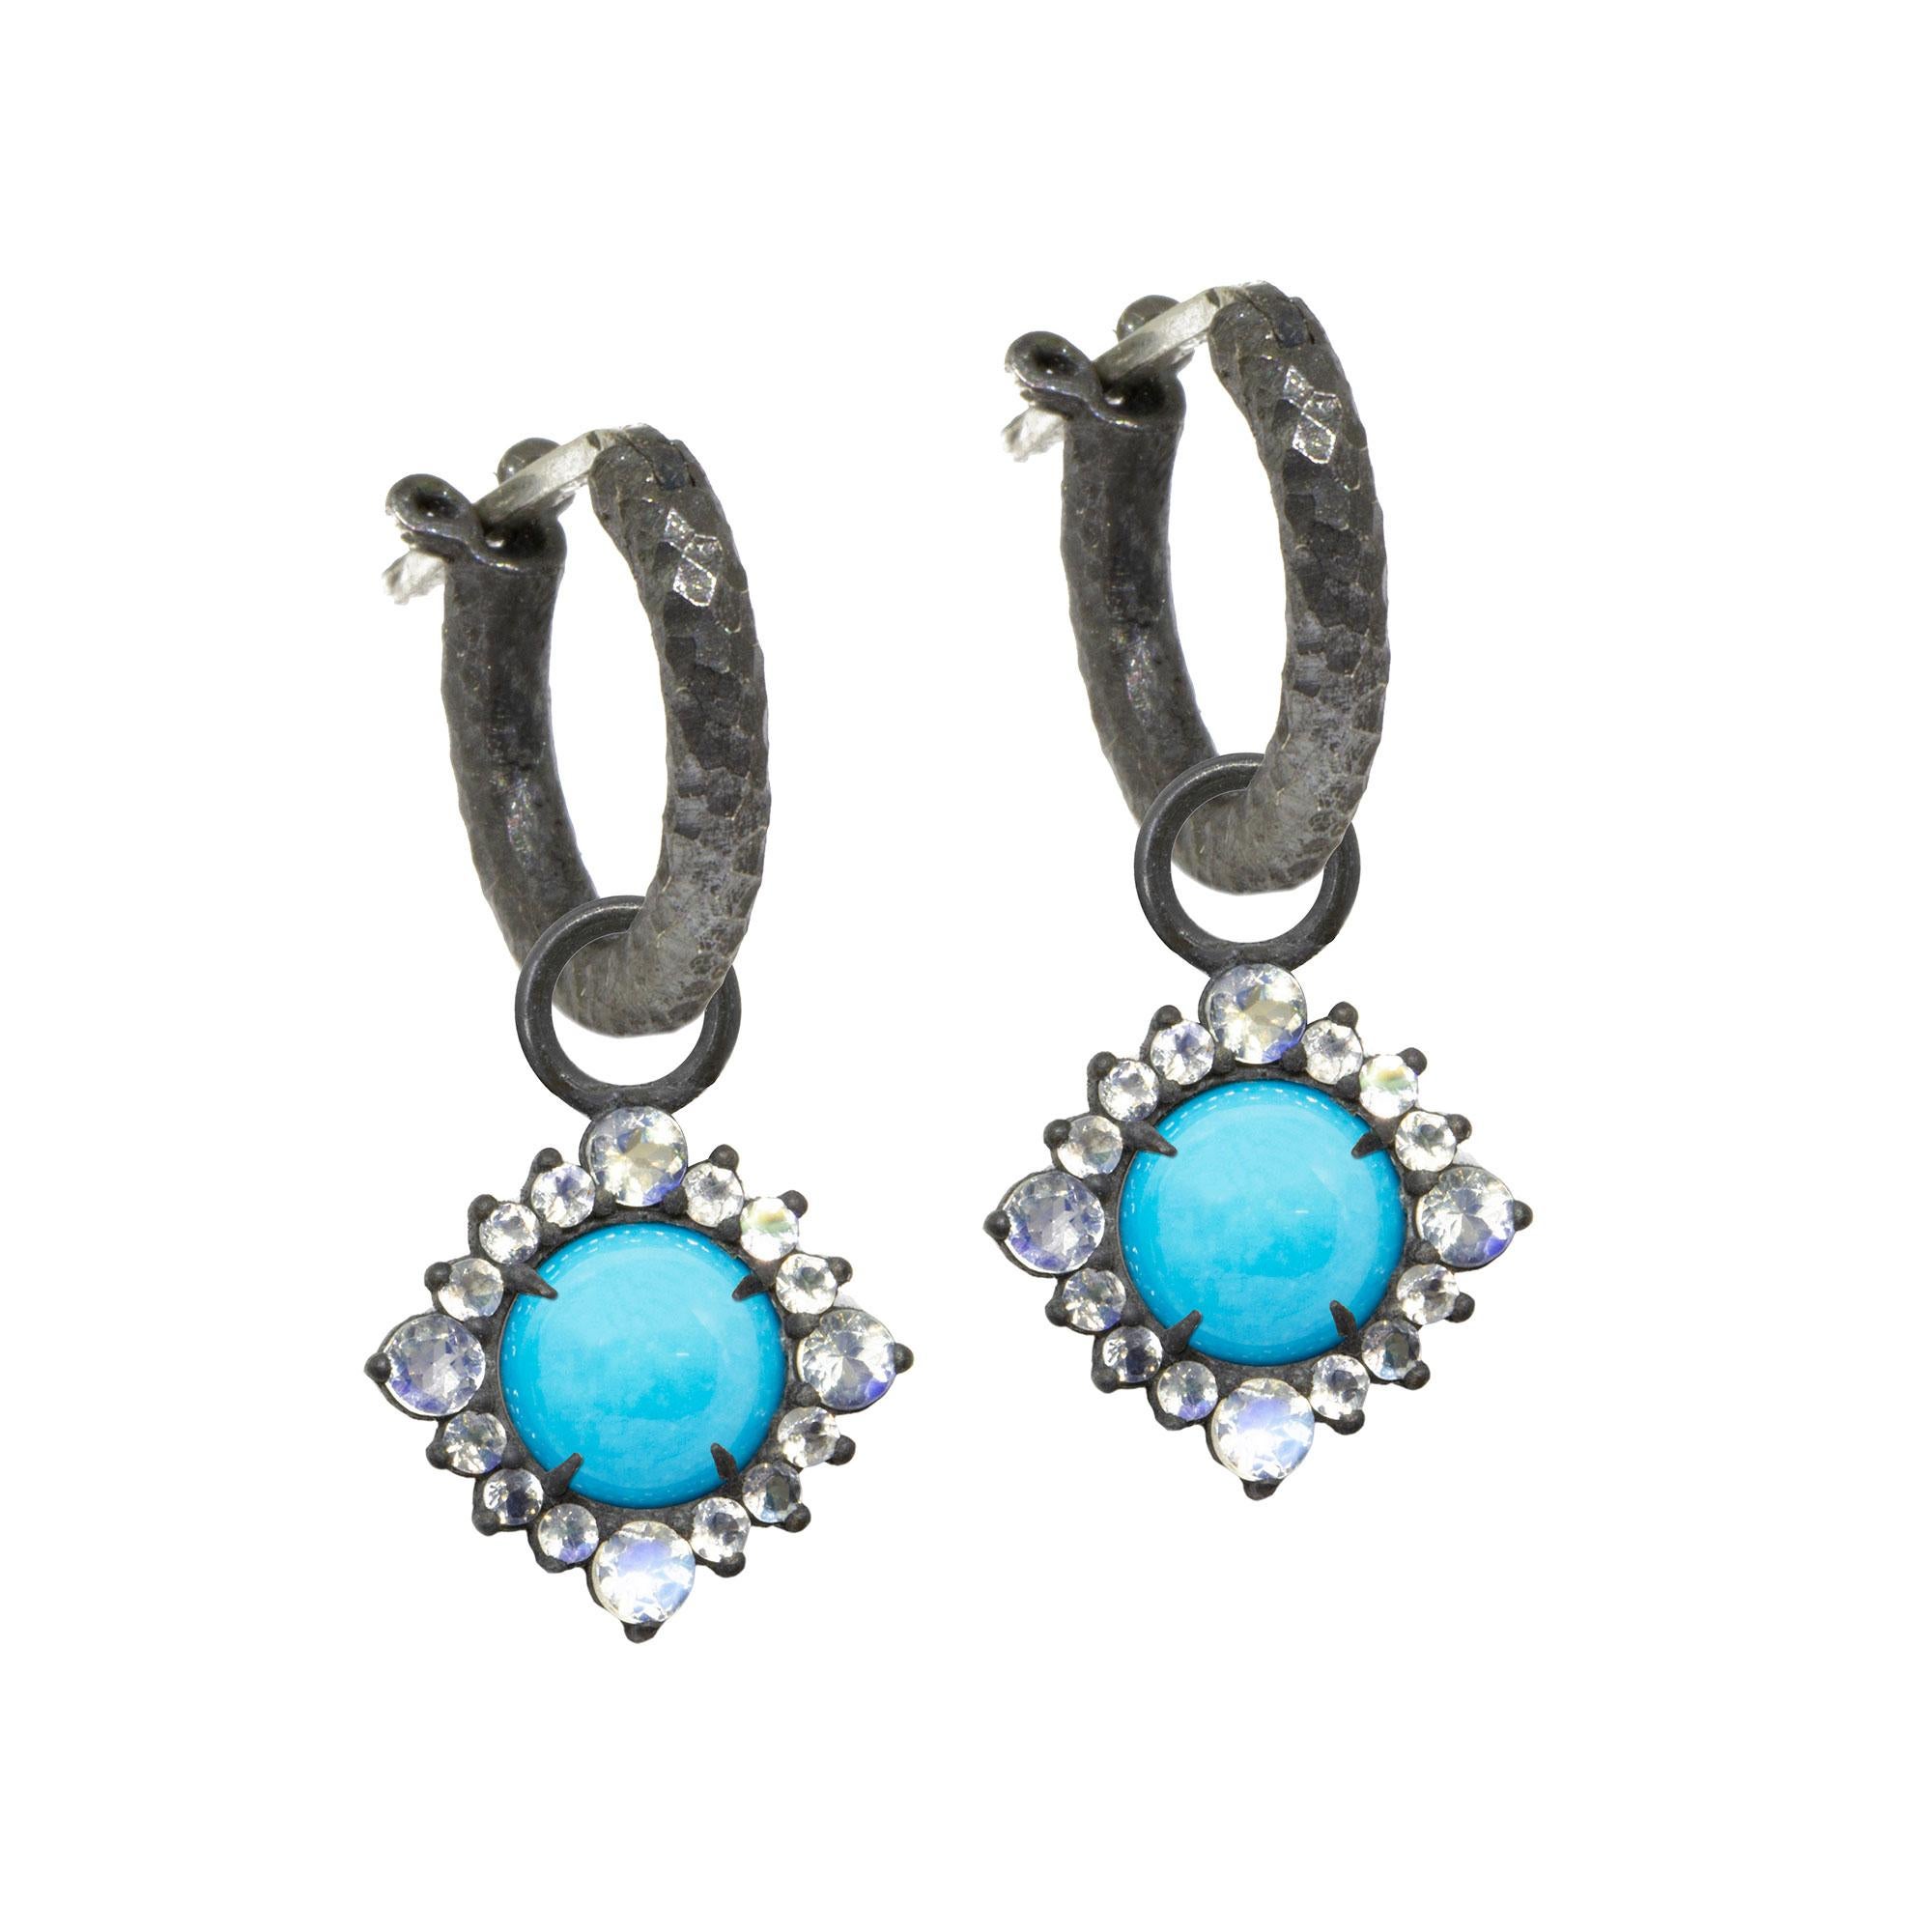  Our moonstone-accented Grace Silver Earring Charms are rimmed in black oxidized silver, with a vivid turquoise gemstone at the center. Pair them with an hoop, mix them with any style, the Grace Silver Earring Charms made a great addition. 

Nina